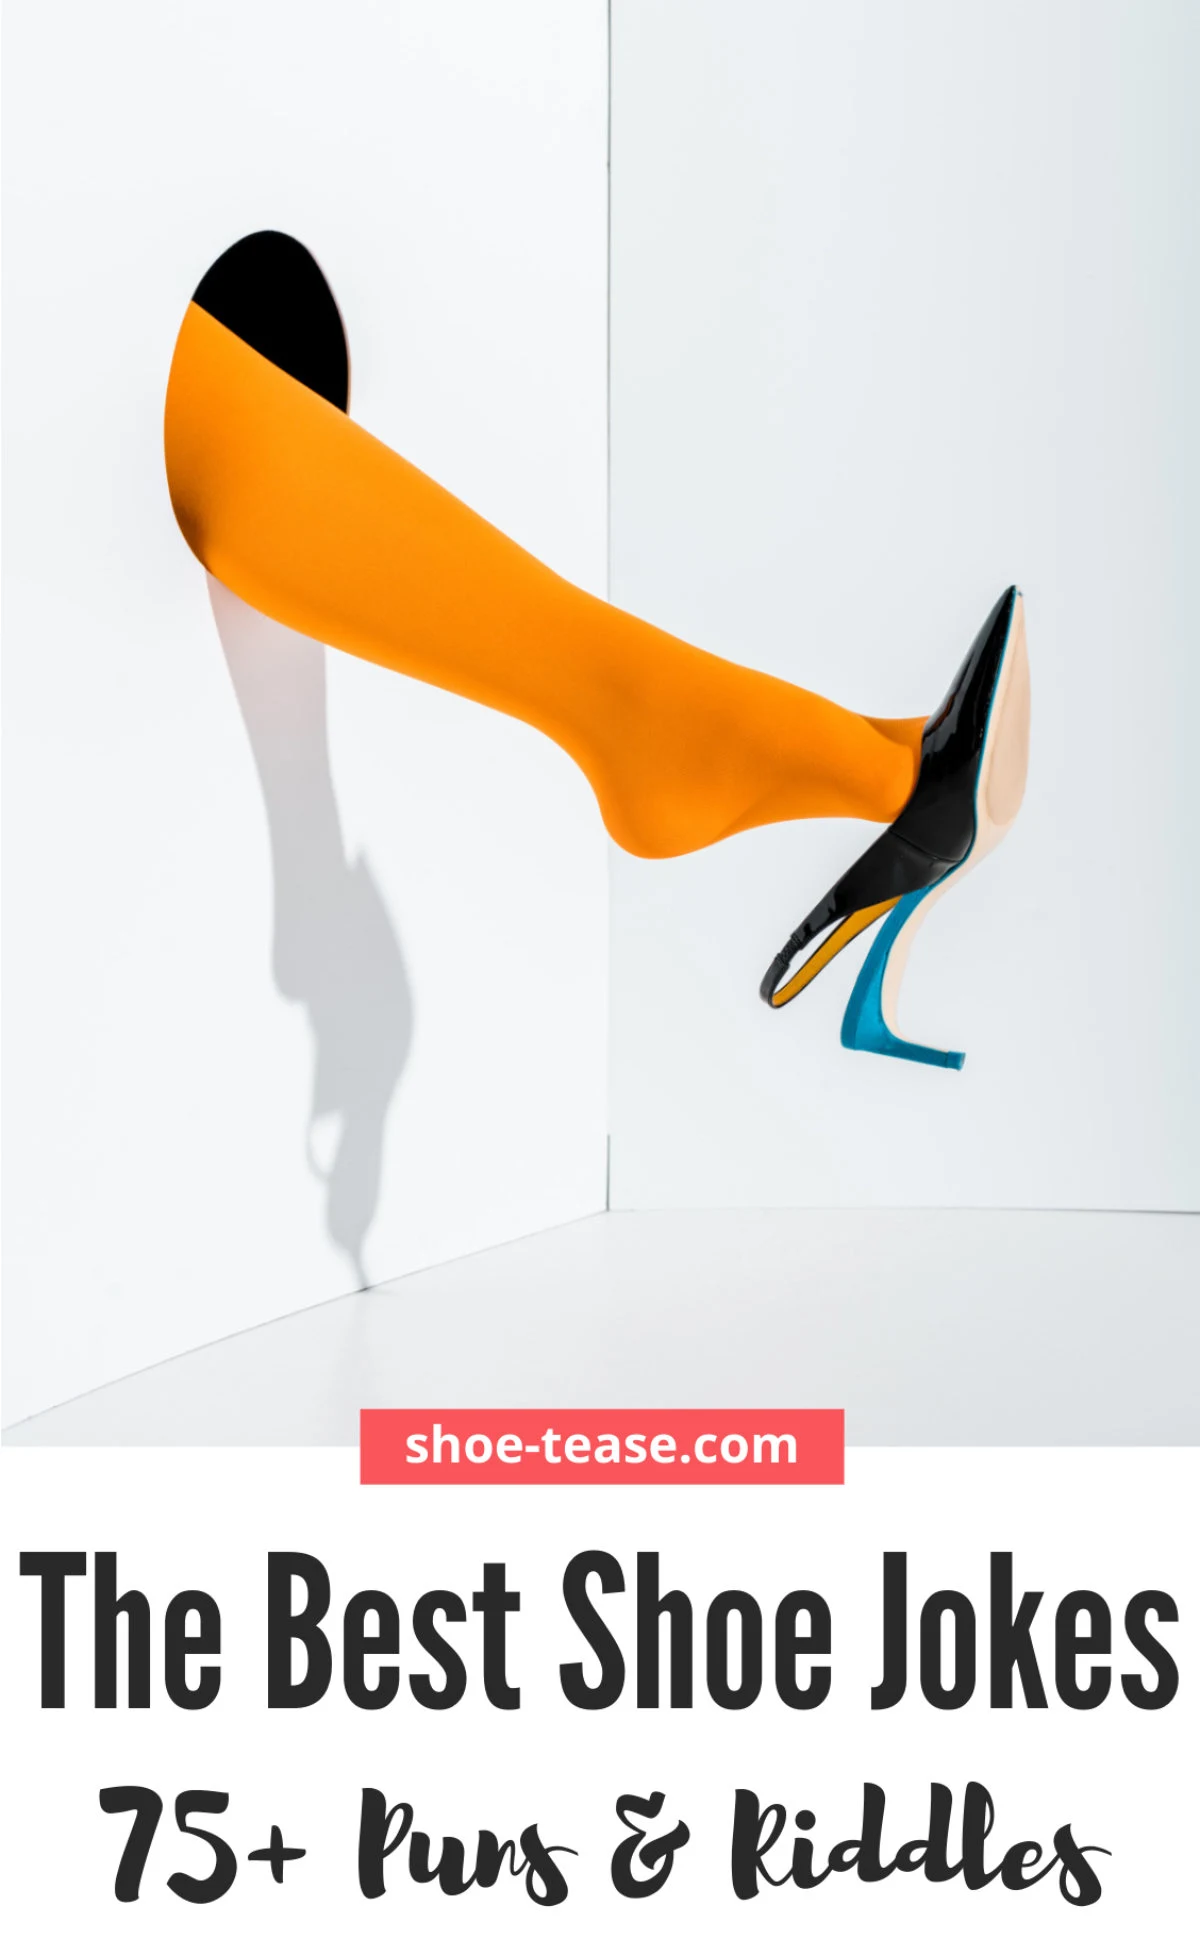 Text reading the best shoe jokes 75 puns and riddles under woman's leg coming out of hole in the wall wearing orange stocking and black slingback heel.